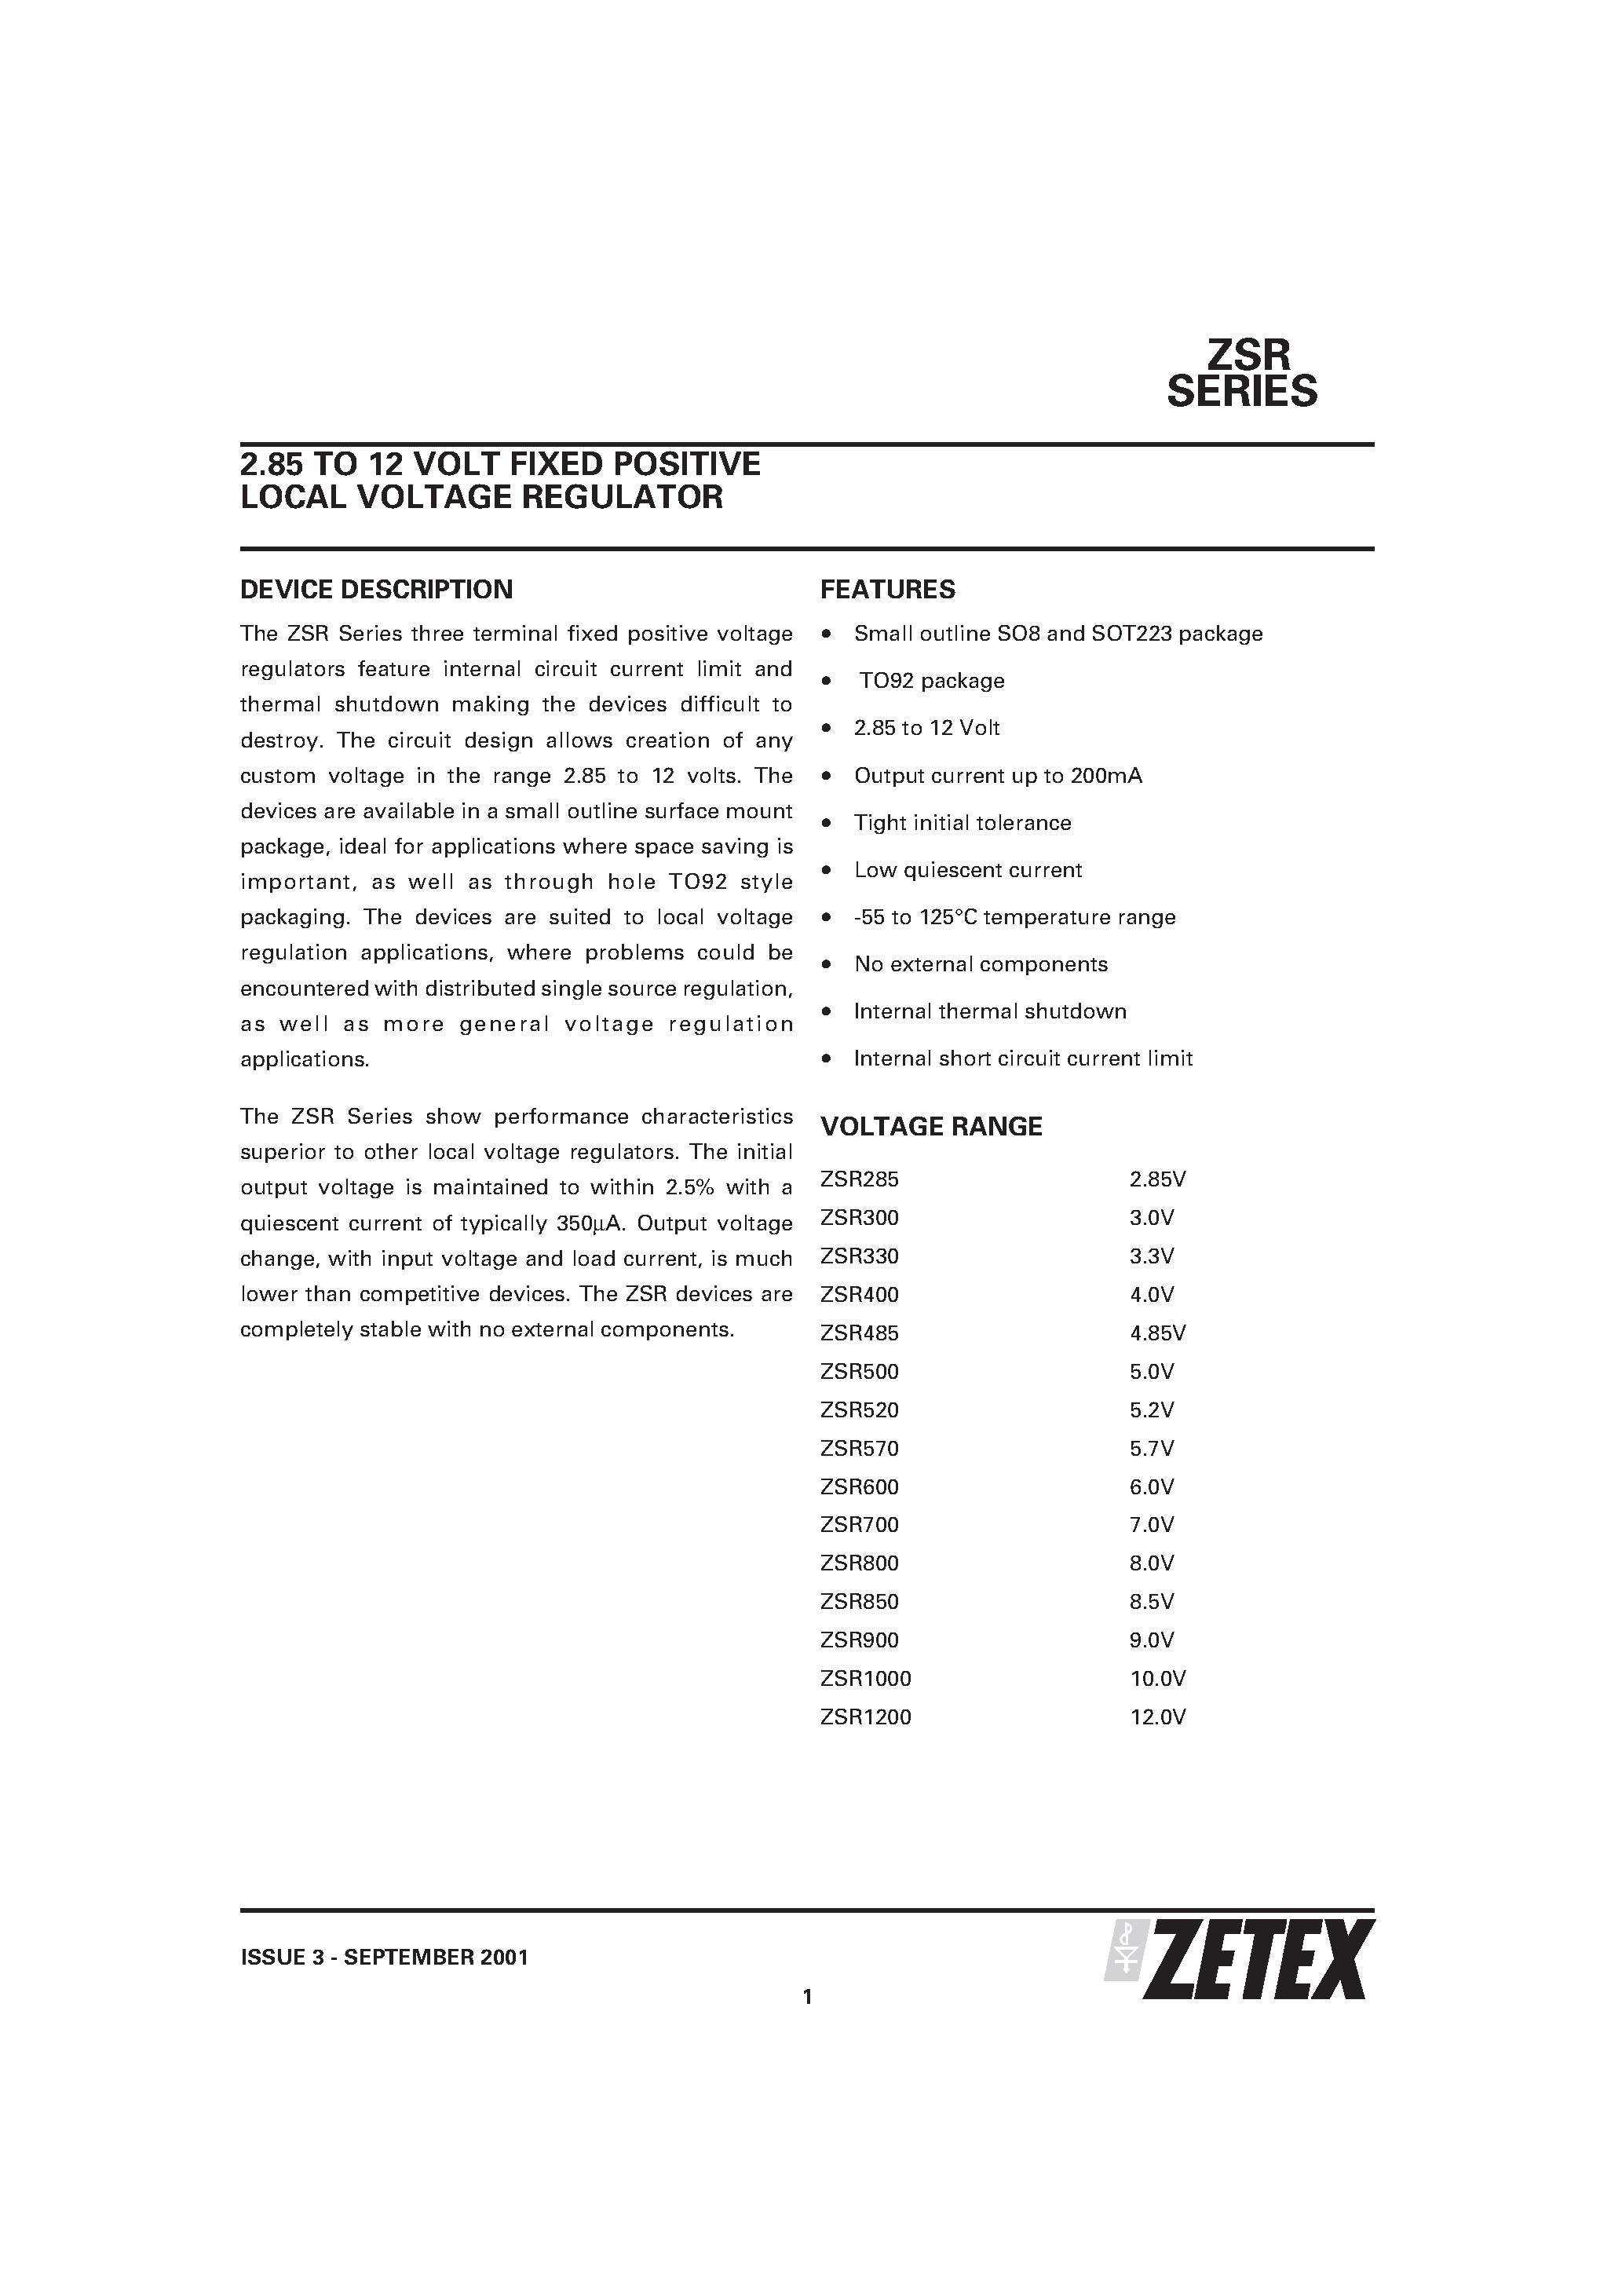 Datasheet ZSR330C - 2.85 TO 12 VOLT FIXED POSITIVE LOCAL VOLTAGE REGULATOR page 1